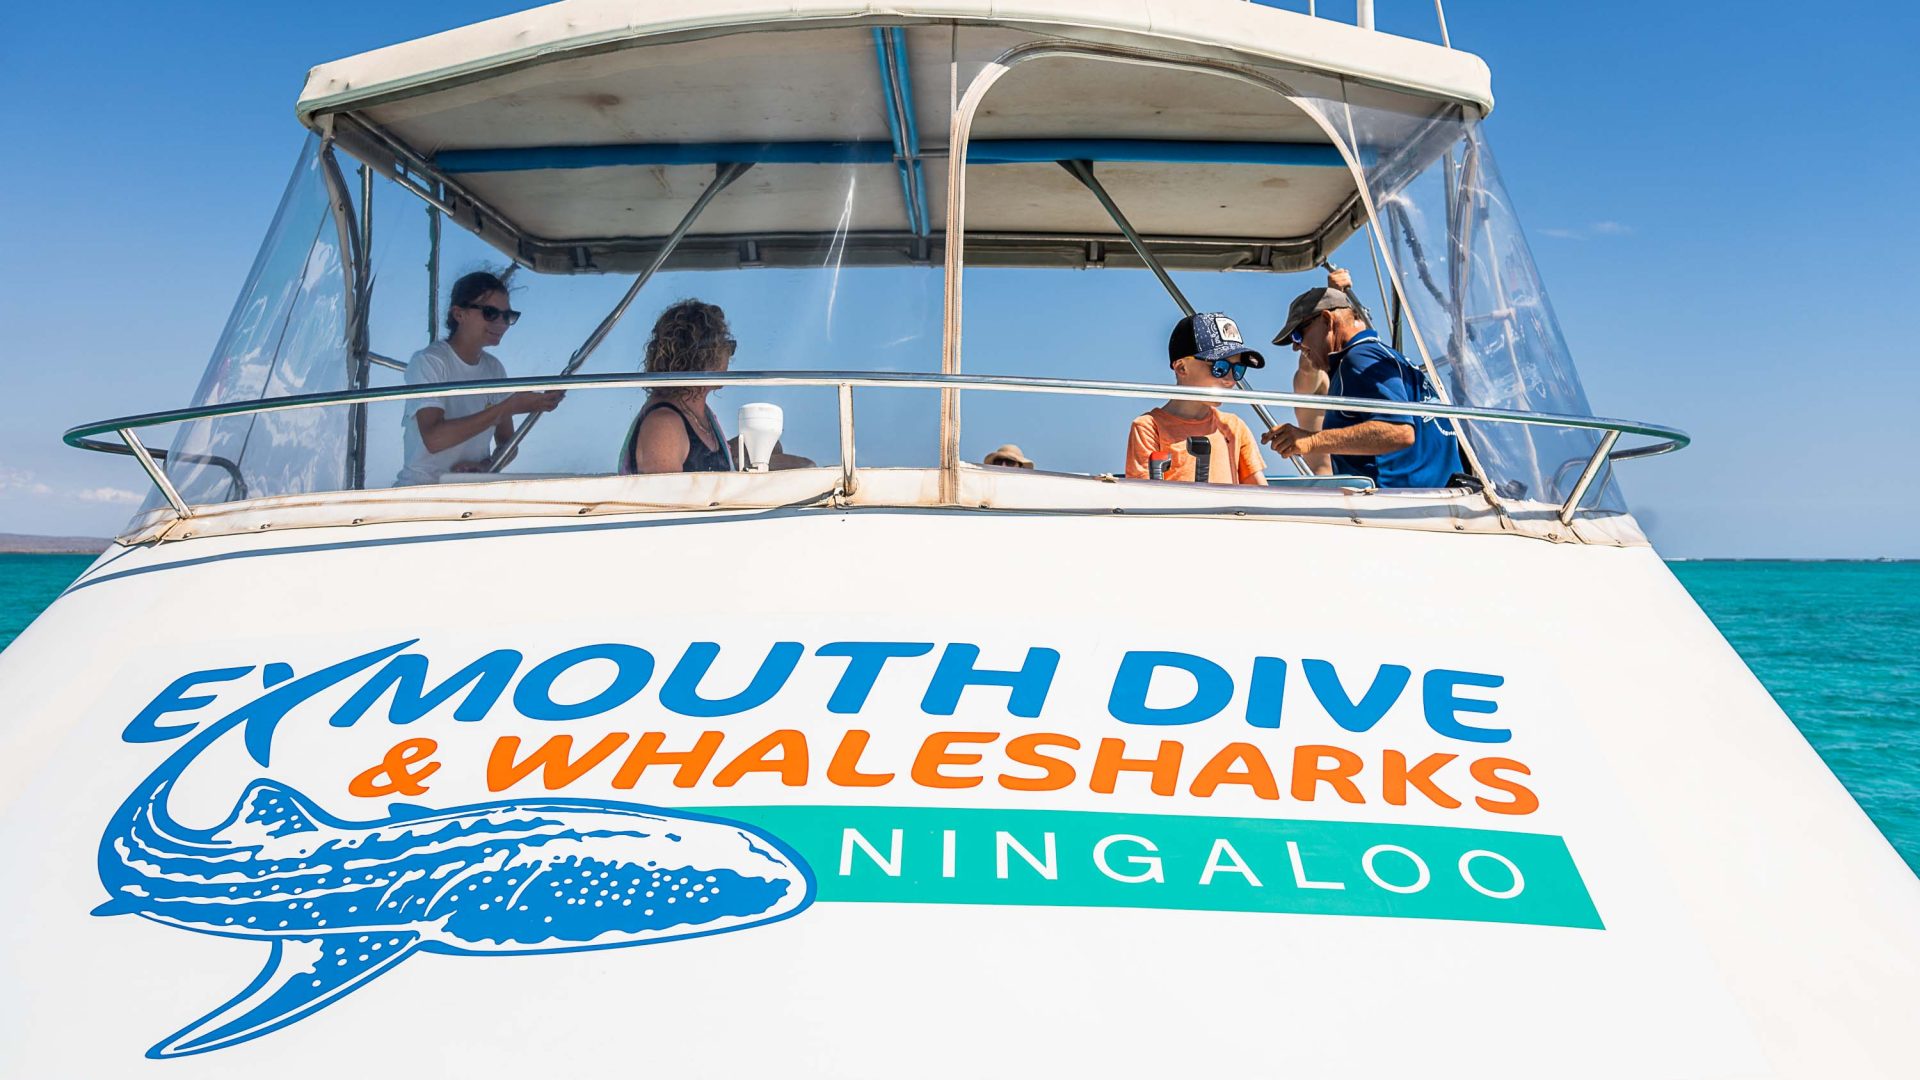 A boat with people on it. The front of the boat is branded with the name Exmouth Dive and whale shark Ningaloo.